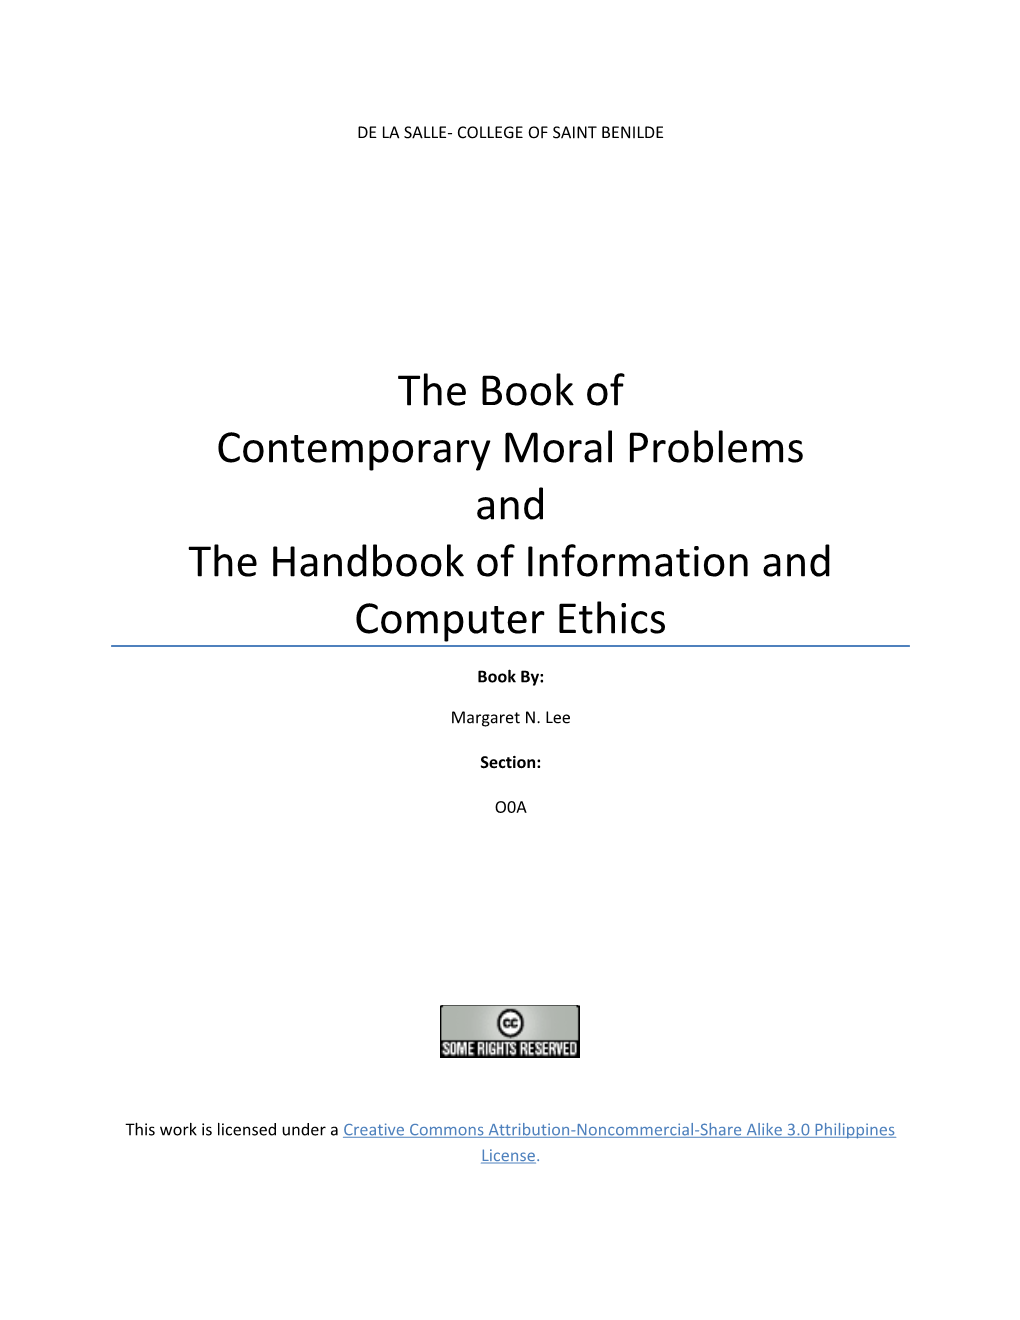 The Book of Contemporary Moral Problems and the Handbook of Information and Computer Ethics